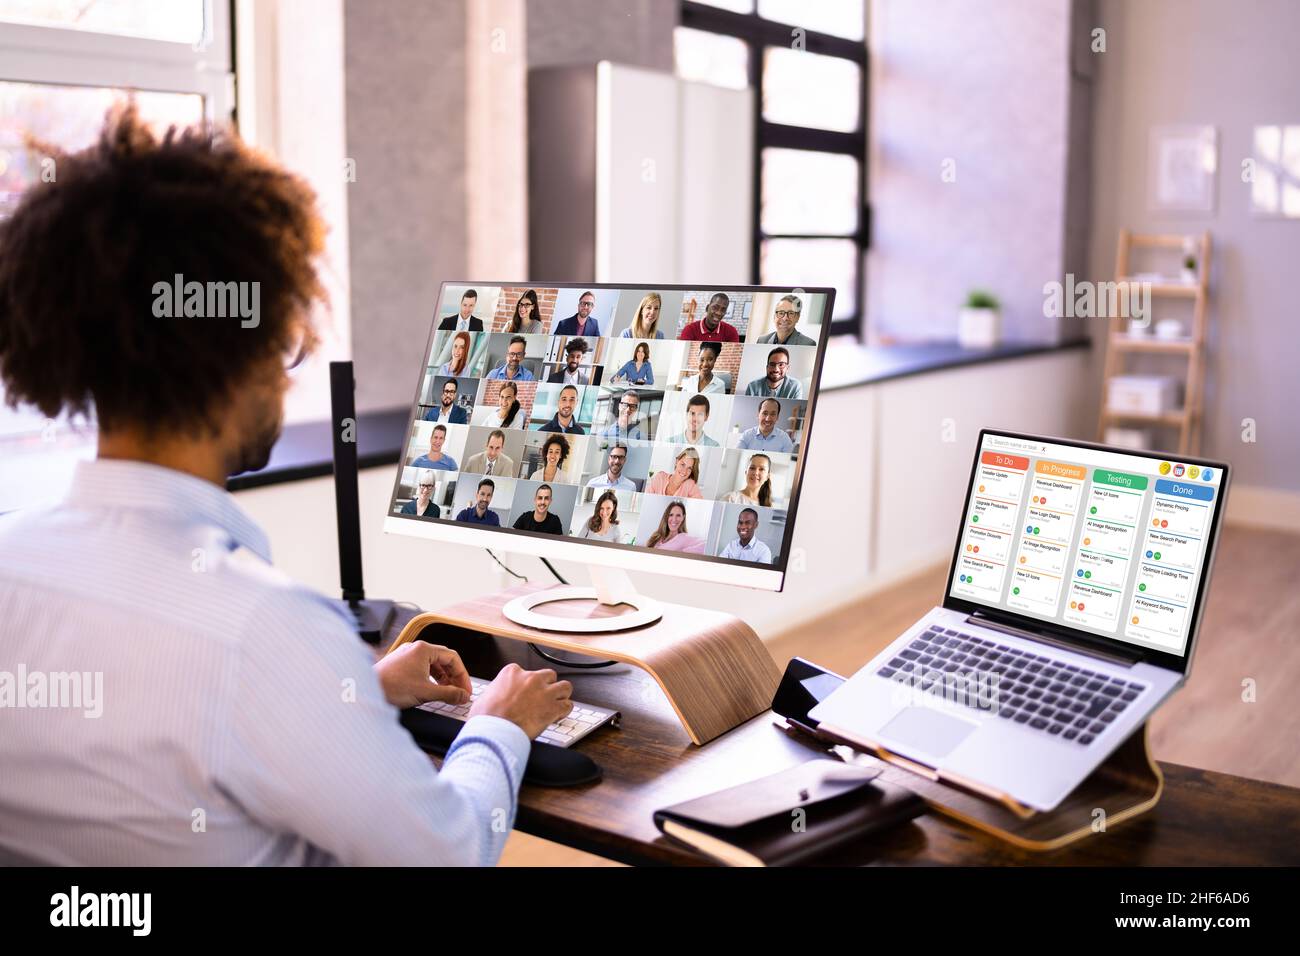 Online Remote Video Conference Webinar Meeting Call Stock Photo